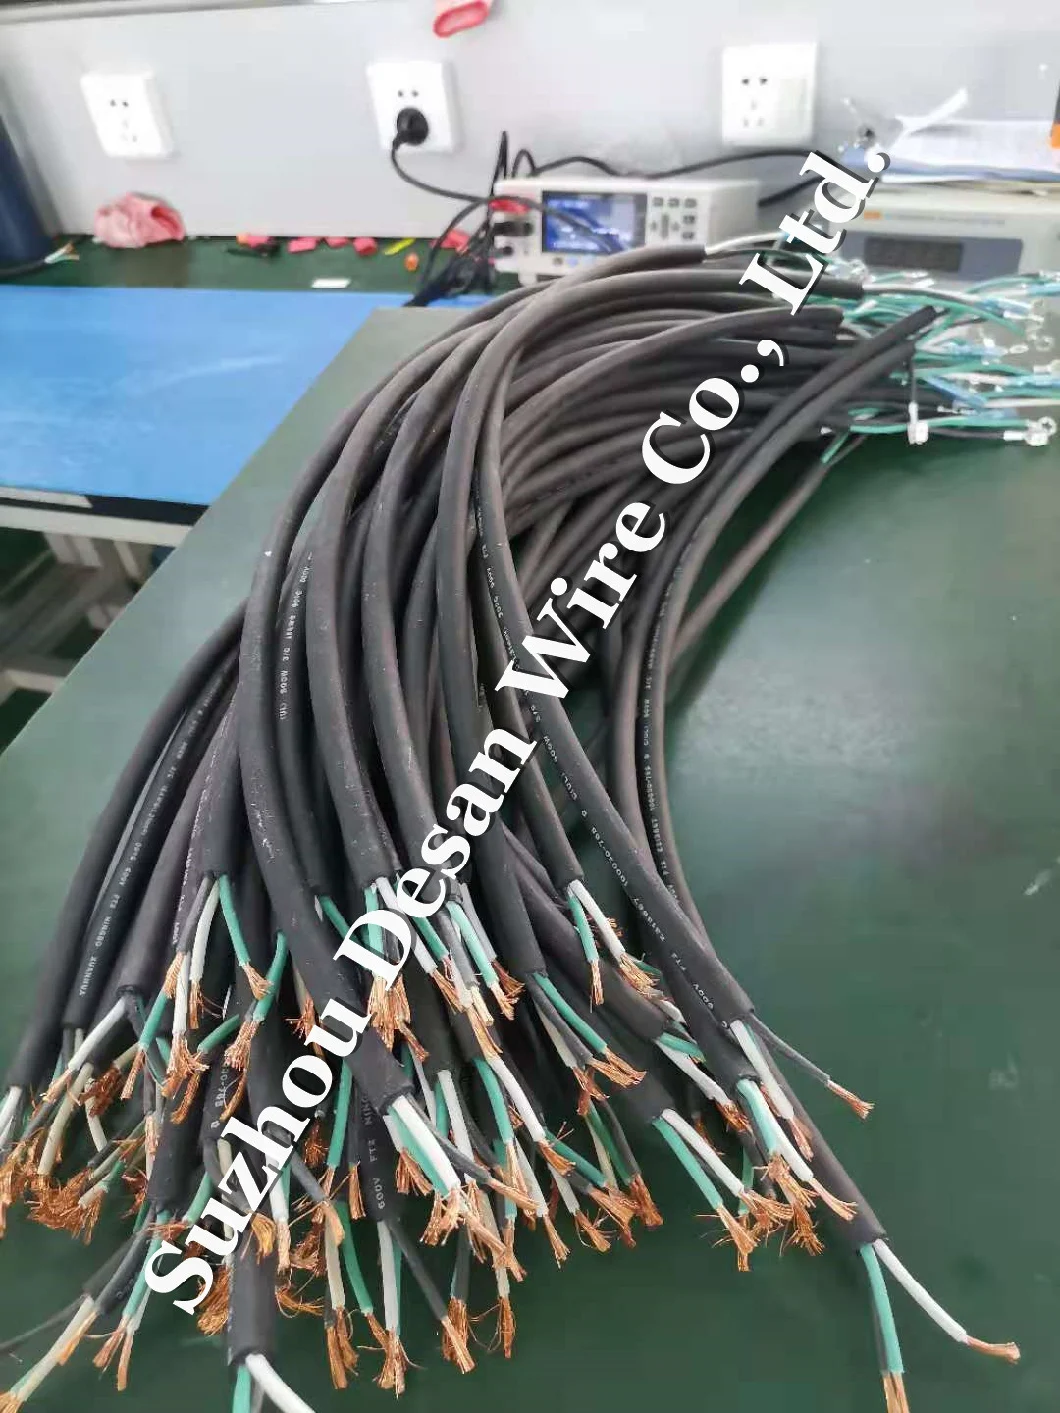 Electrical Electric Power Wire Cable for New Energy Storage Wire Wiring Harness